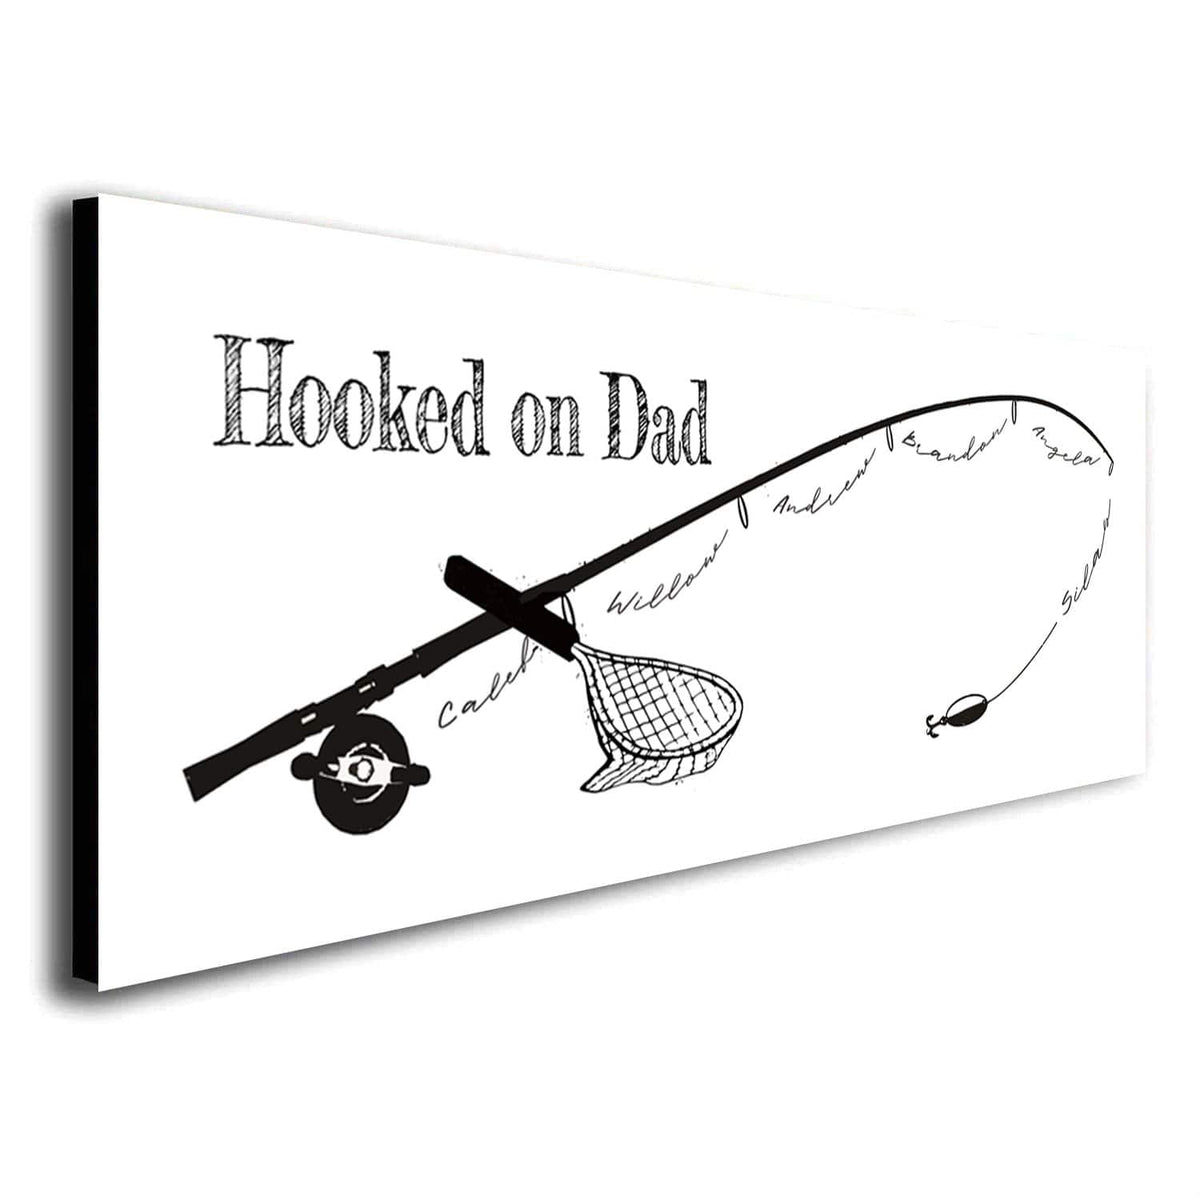 Hooked on Dad - B&W, Customized Fishing Pole Art With Children's